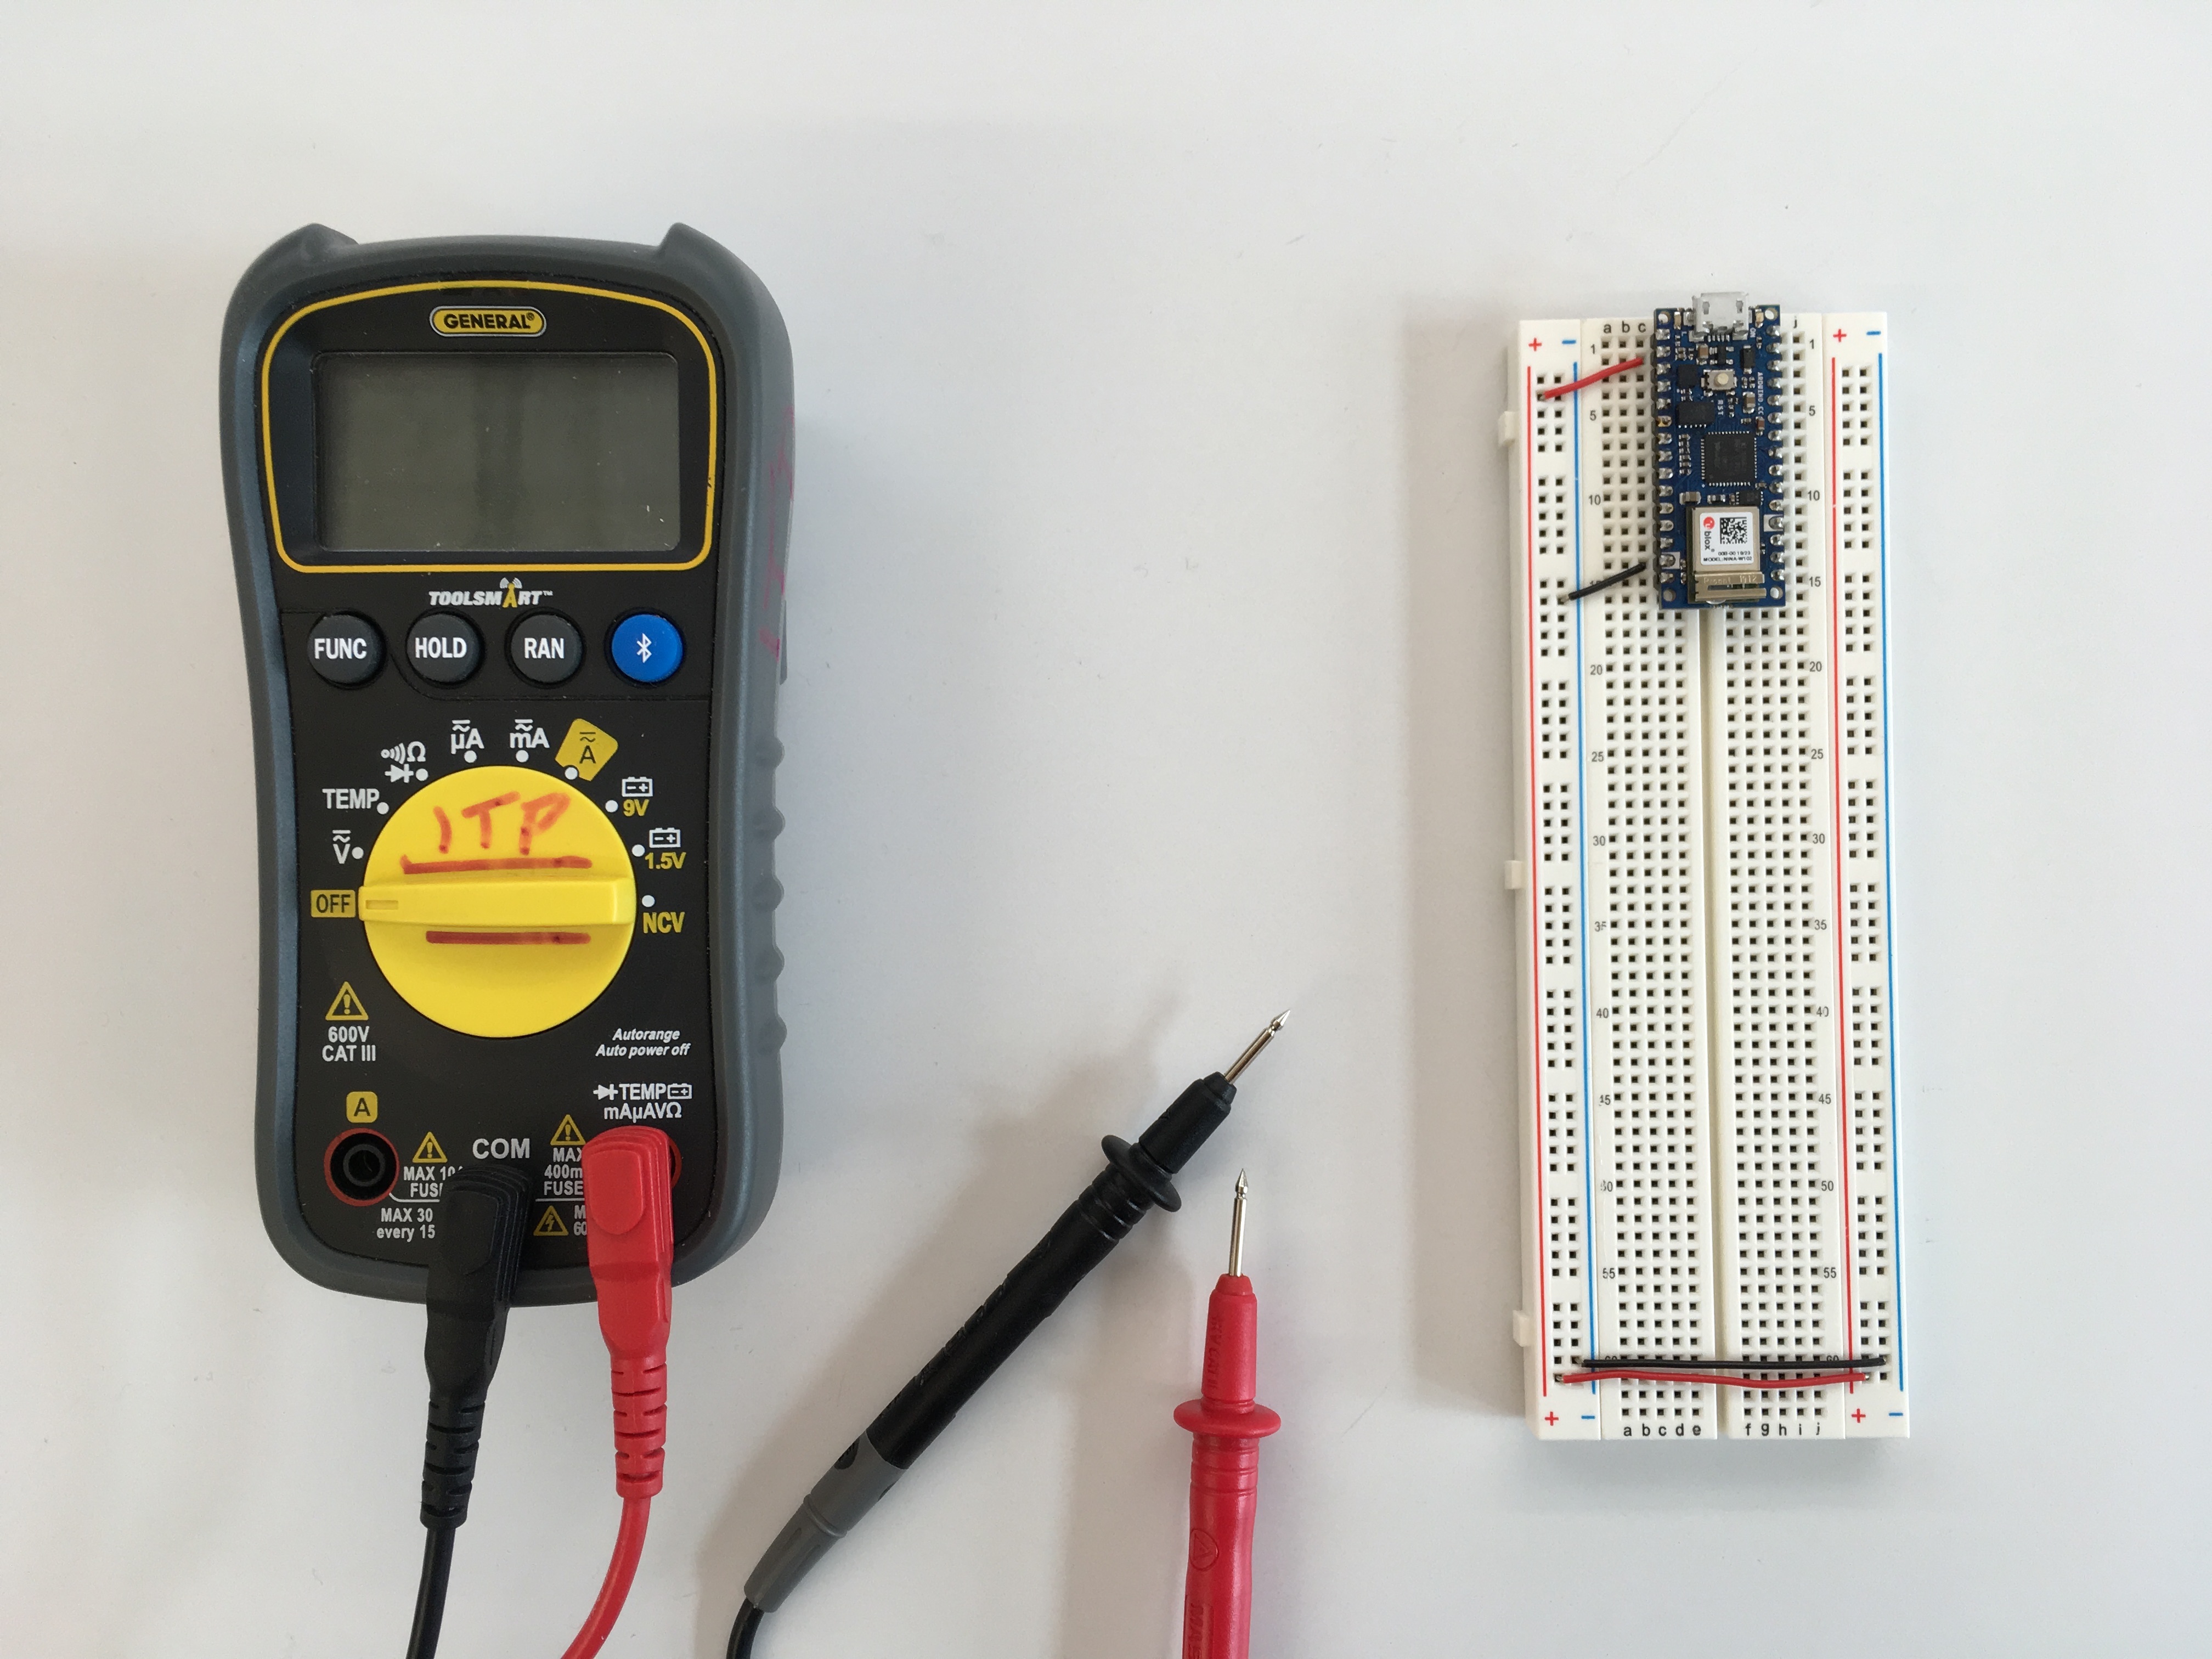 Setting up the breadboard, part 2: connecting the power supply.